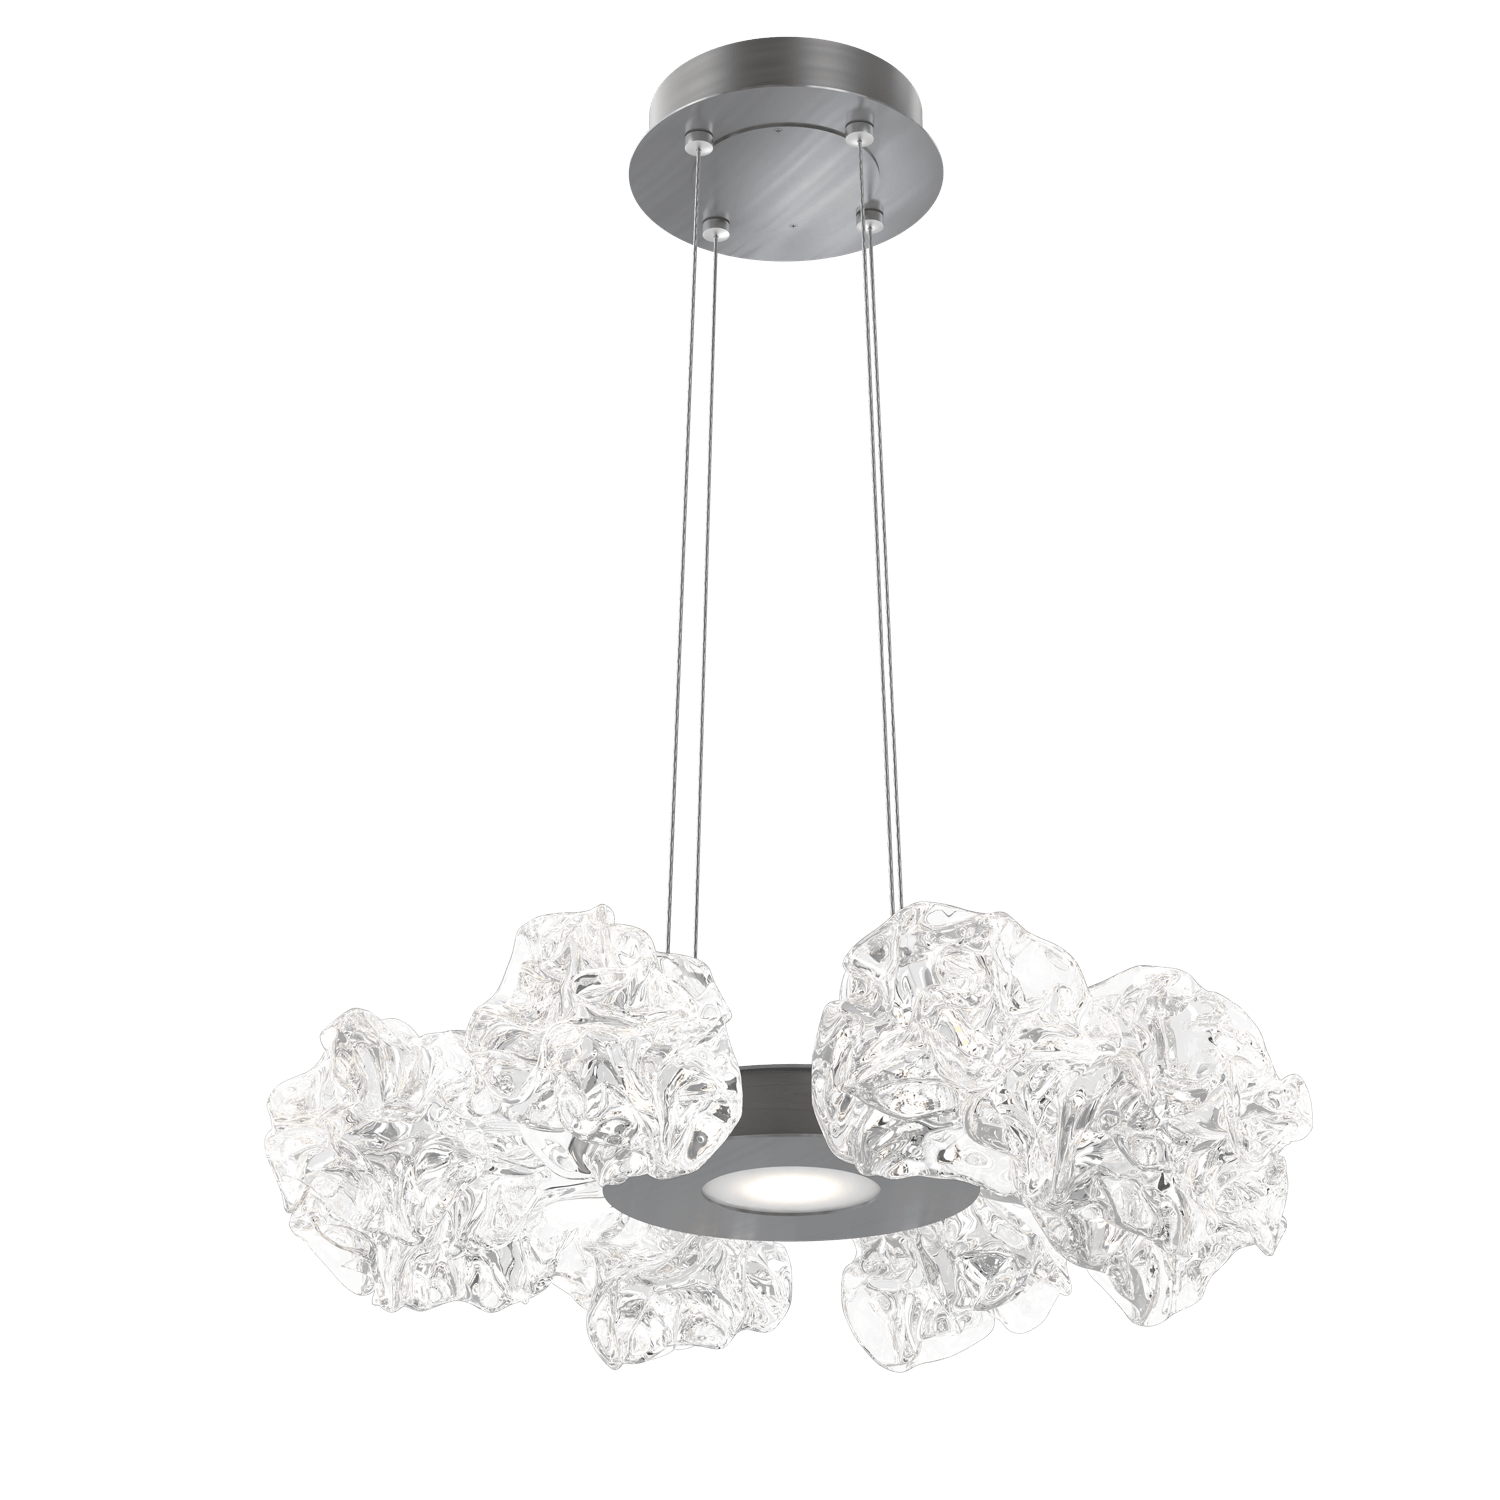 CHB0059-24-GM-Hammerton-Studio-Blossom-24-inch-radial-ring-chandelier-with-gunmetal-finish-and-clear-handblown-crystal-glass-shades-and-LED-lamping